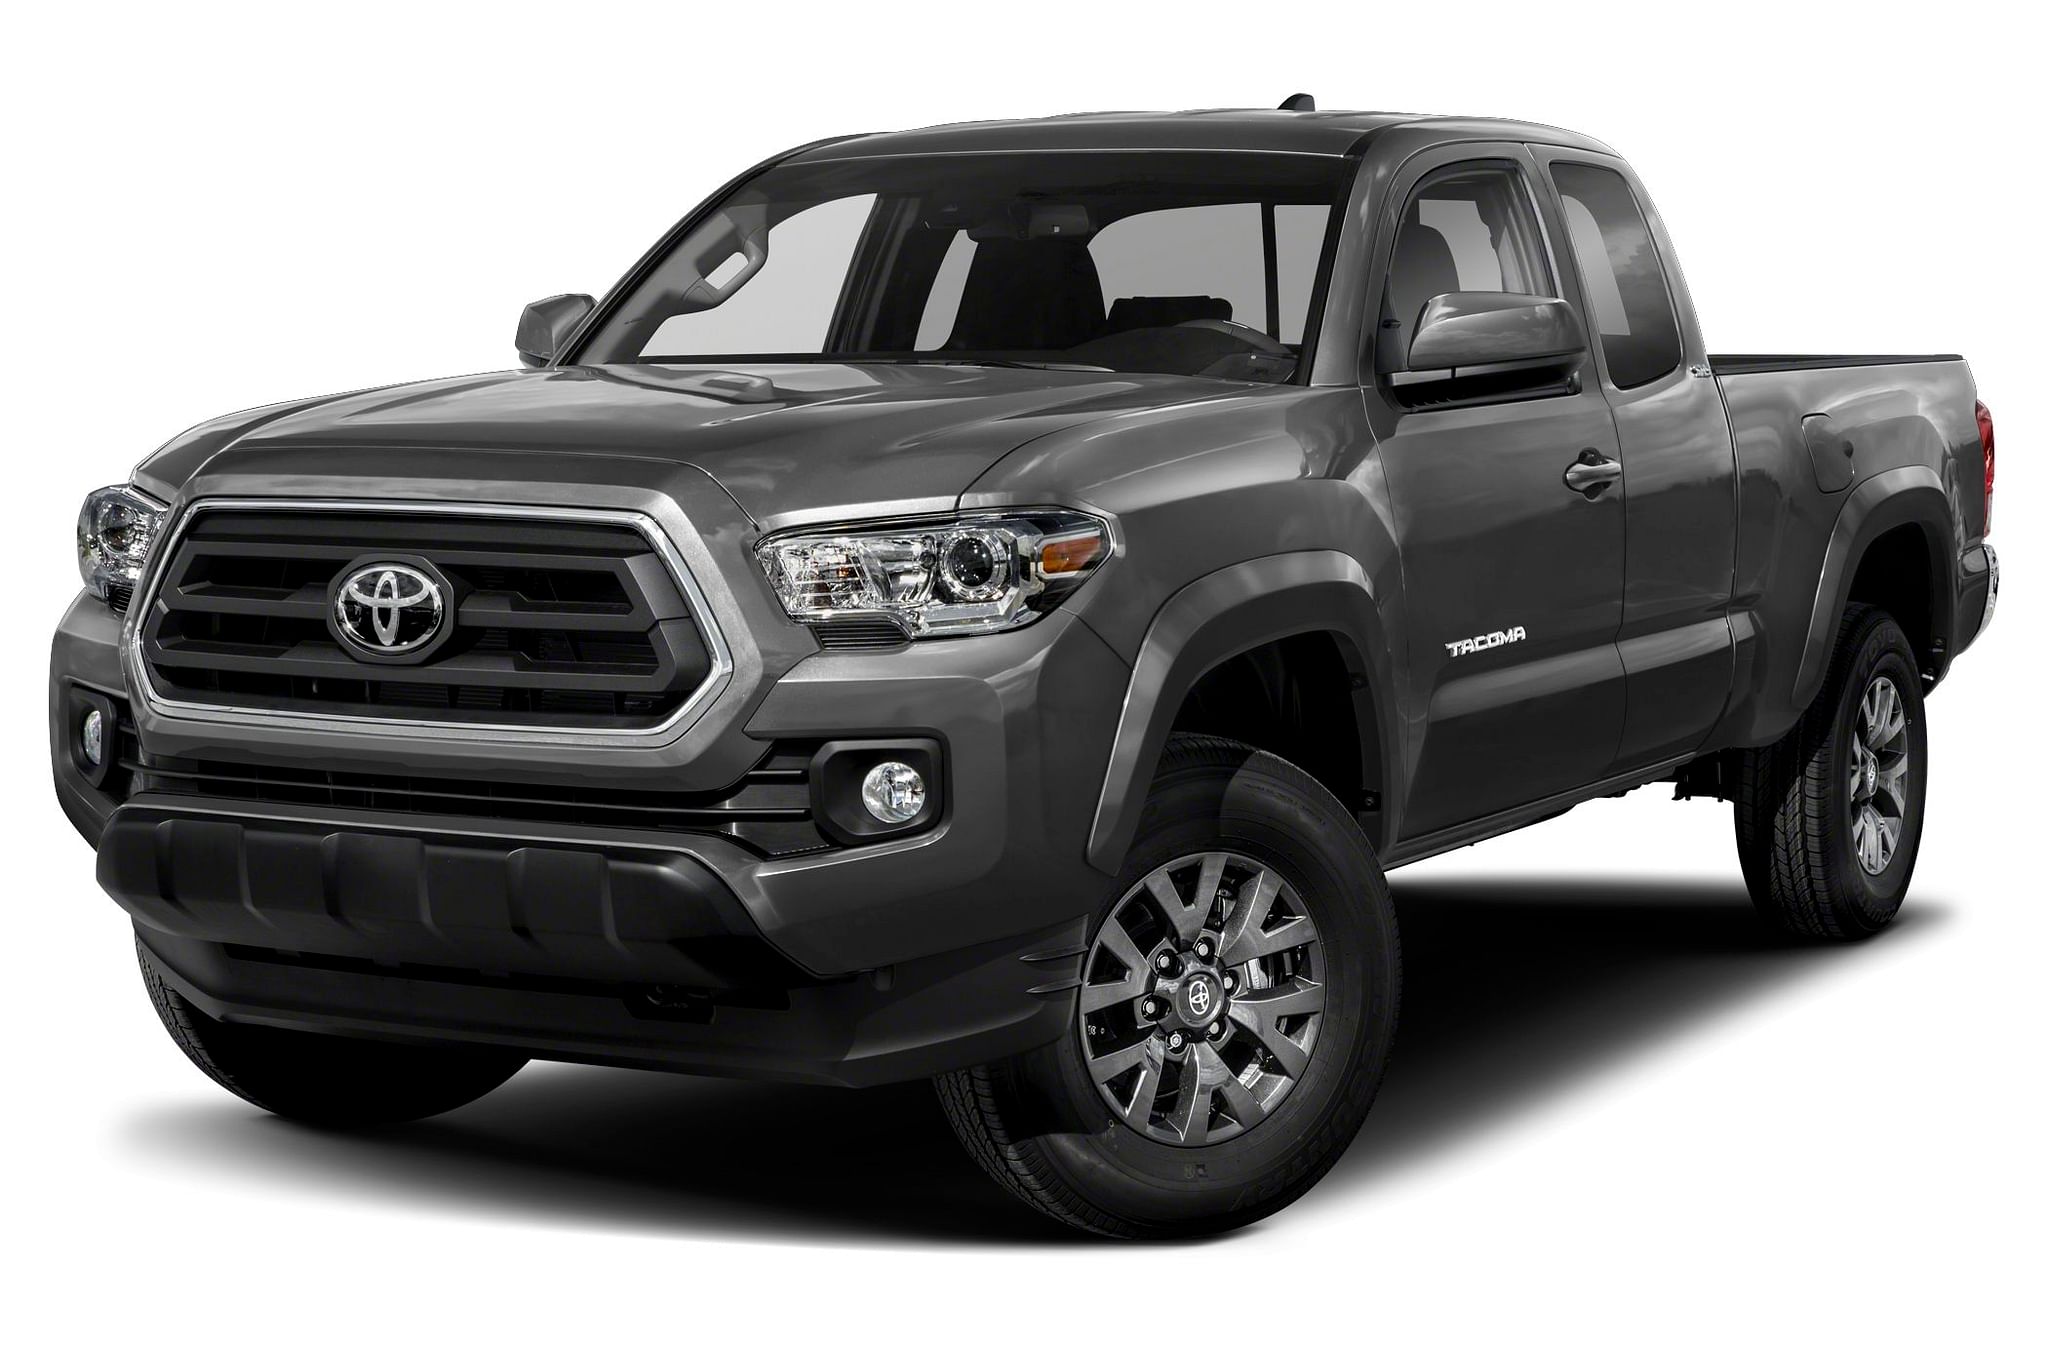 2022 Toyota TRD Sport Access Cab Price, Review, Pictures and